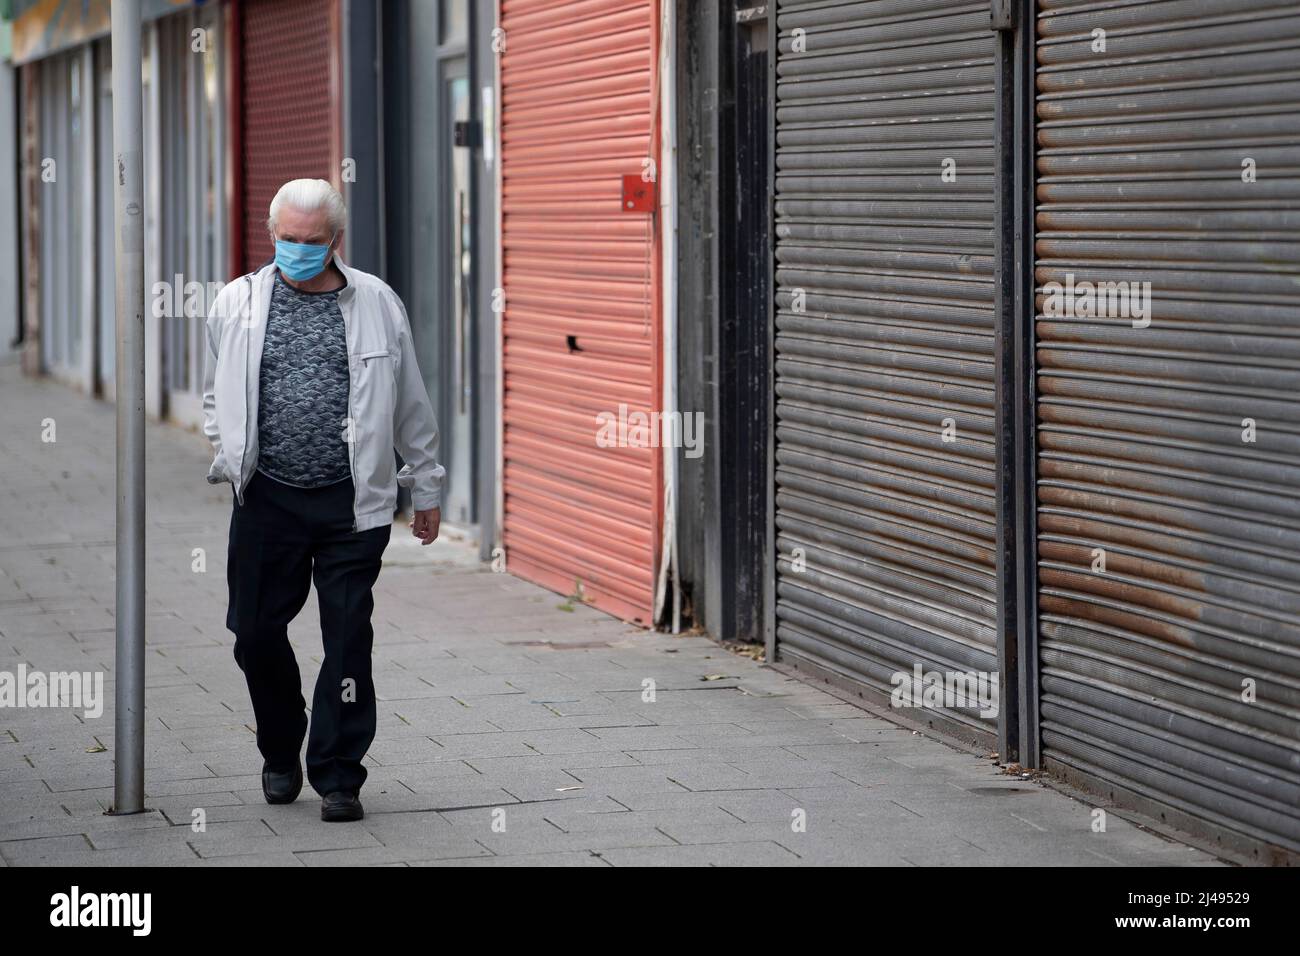 A man wearing a face mask walks past a closed small business during the coronavirus lockdown period in Barry, Wales, United Kingdom. Stock Photo